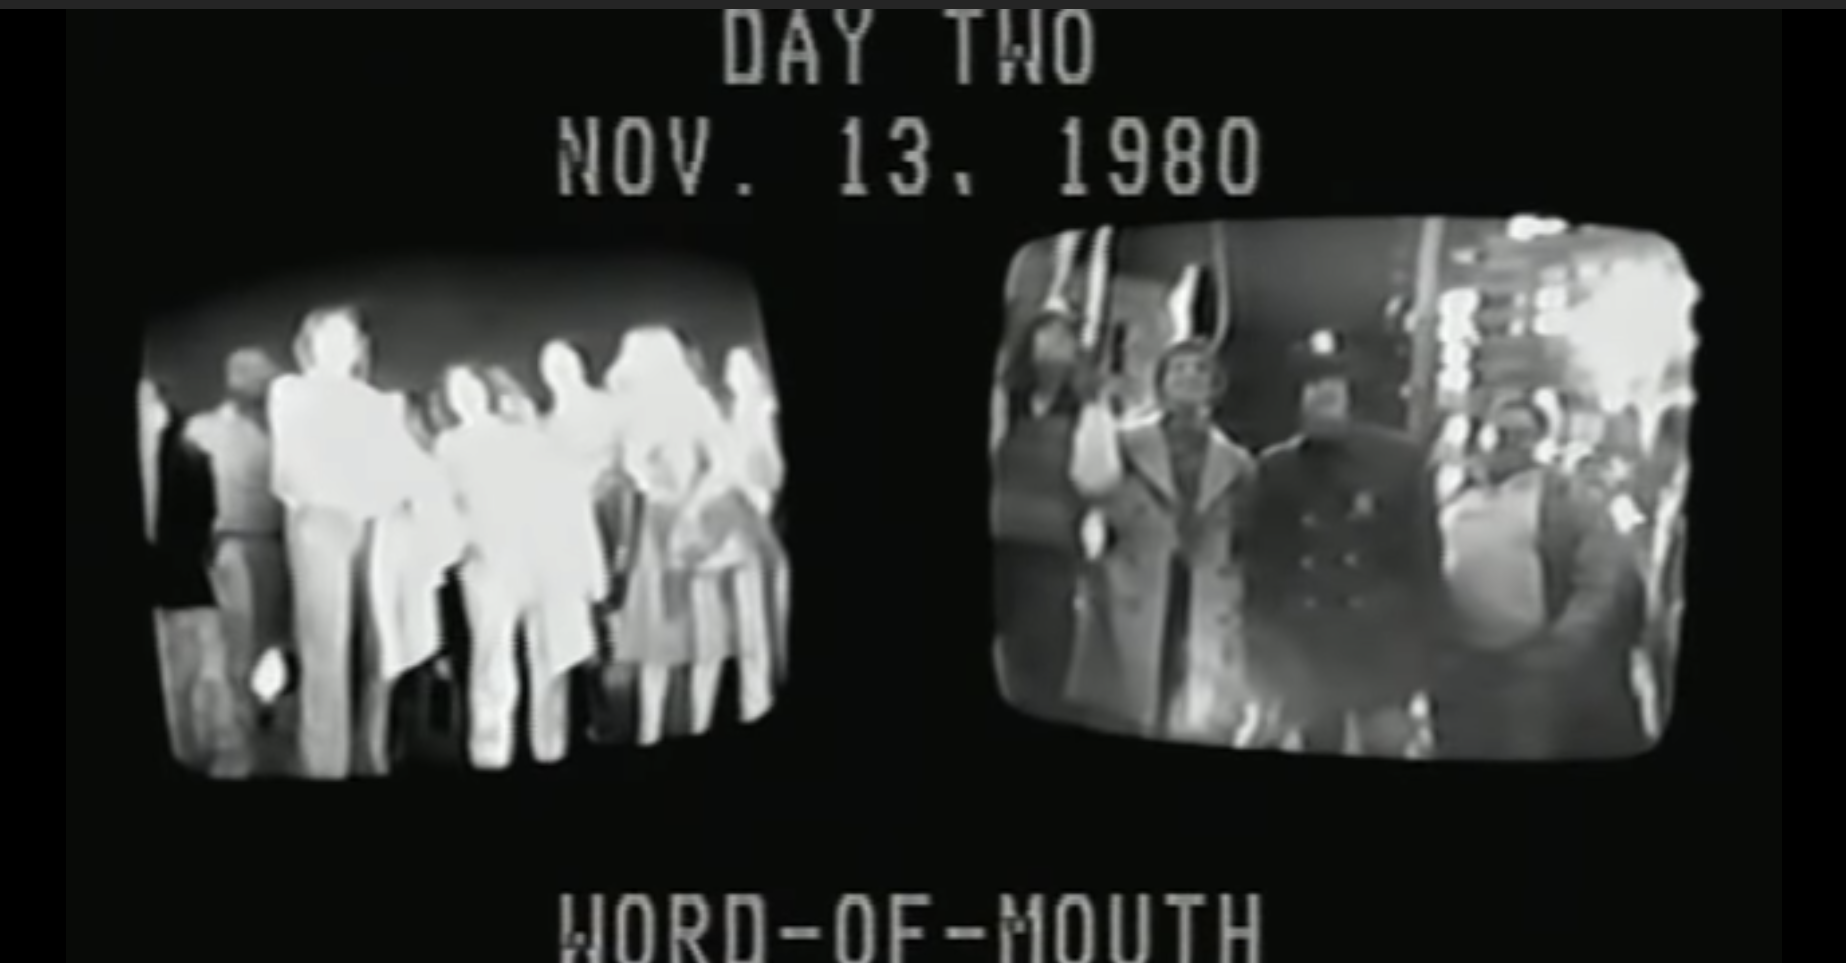 two tv screens side-by-side, on a black background with text at top that reads: DAY TWO Nov. 13 1980, and text at bottom that reads: WORD-OF-MOUTH